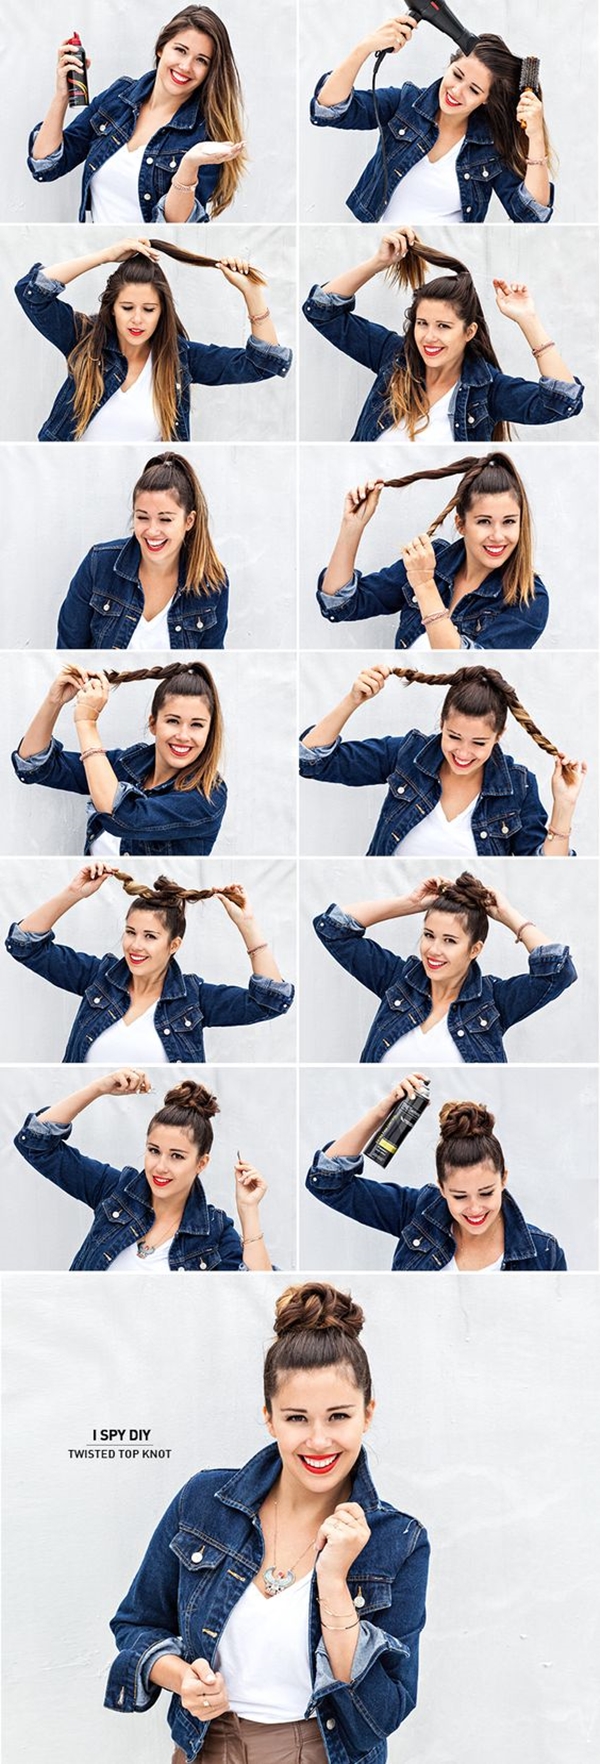 How to Make Bun Hairstyles - 2